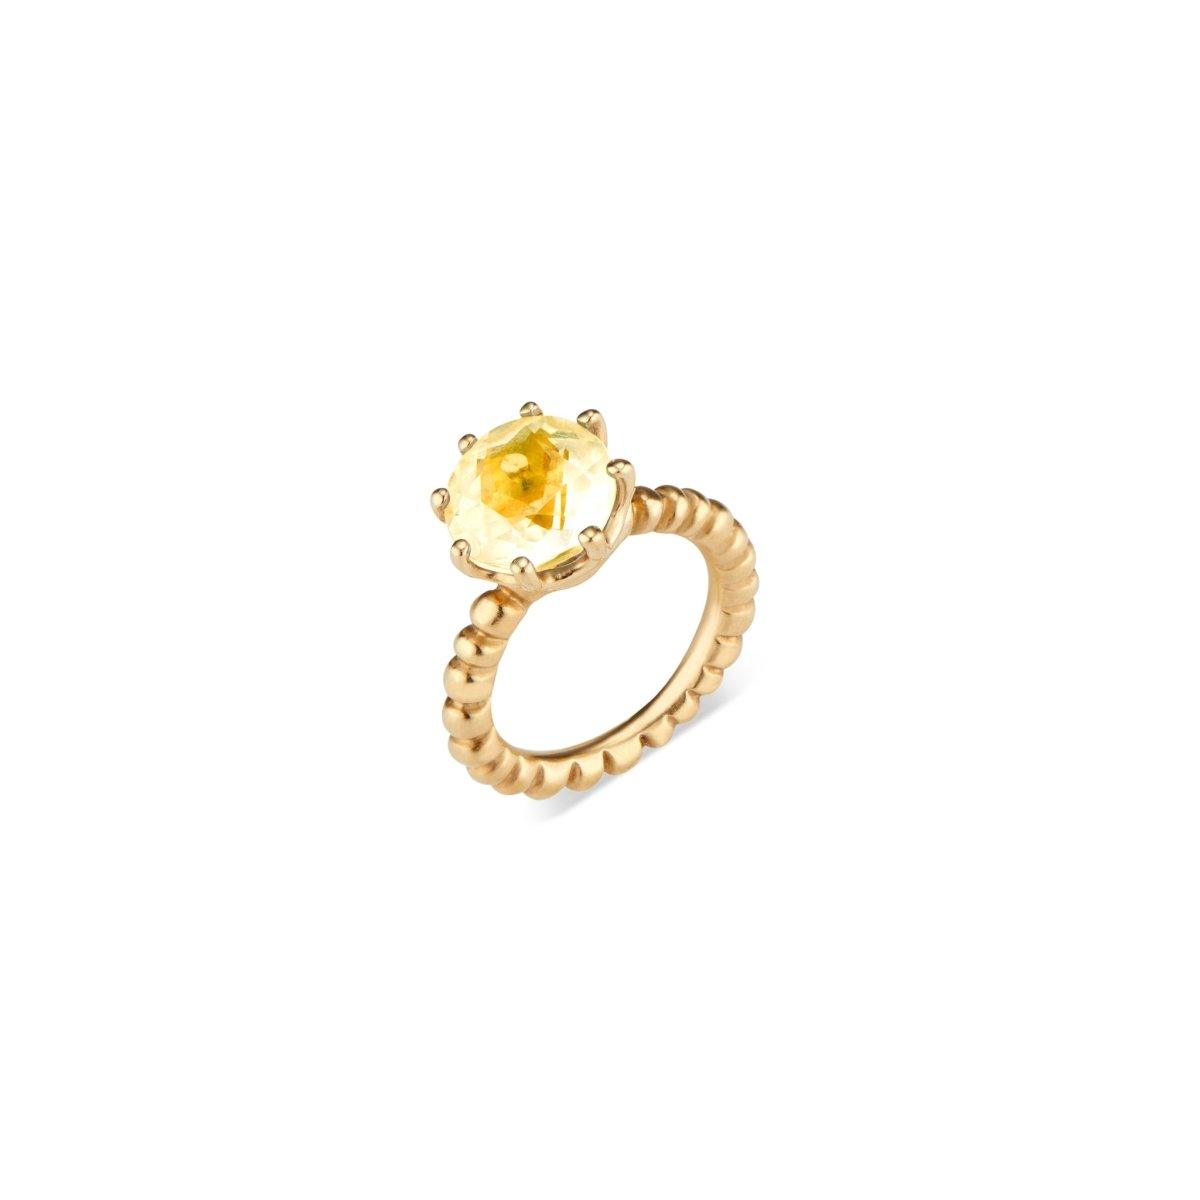 Gold Crown Ring with Yellow Beryl - Nataly Aponte